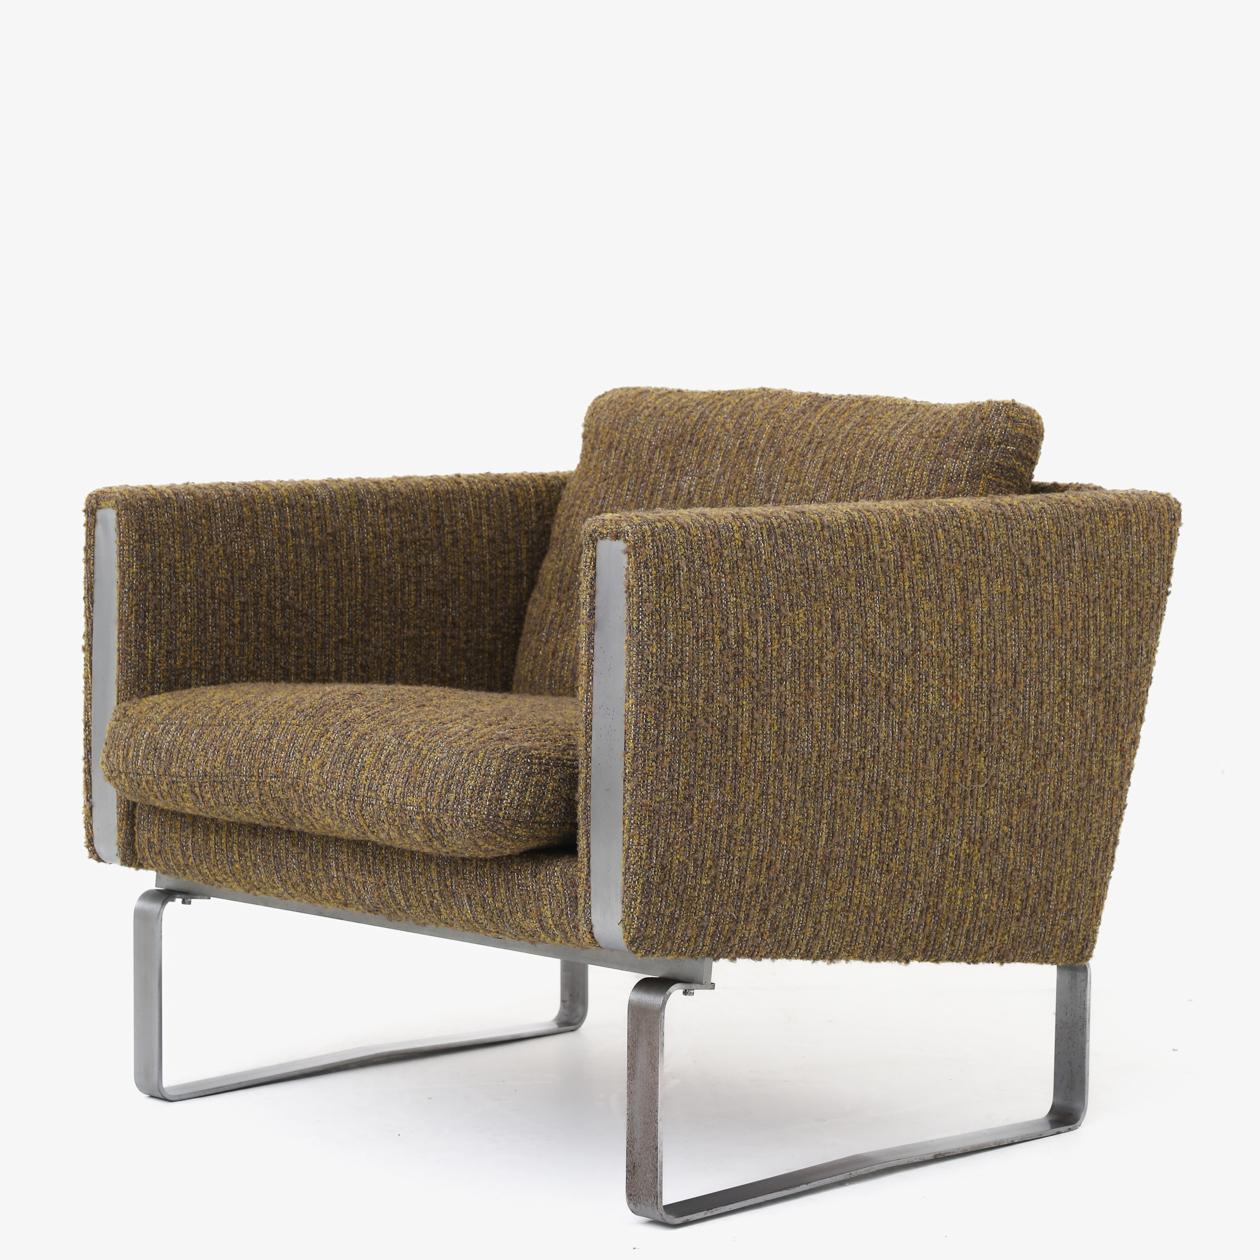 JH 801 - Reupholstered easy chair in new textile (Malou Ocre from Pierre Frey) on steel frame. Designed in the 1970s. Hans J. Wegner / Johannes Hansen